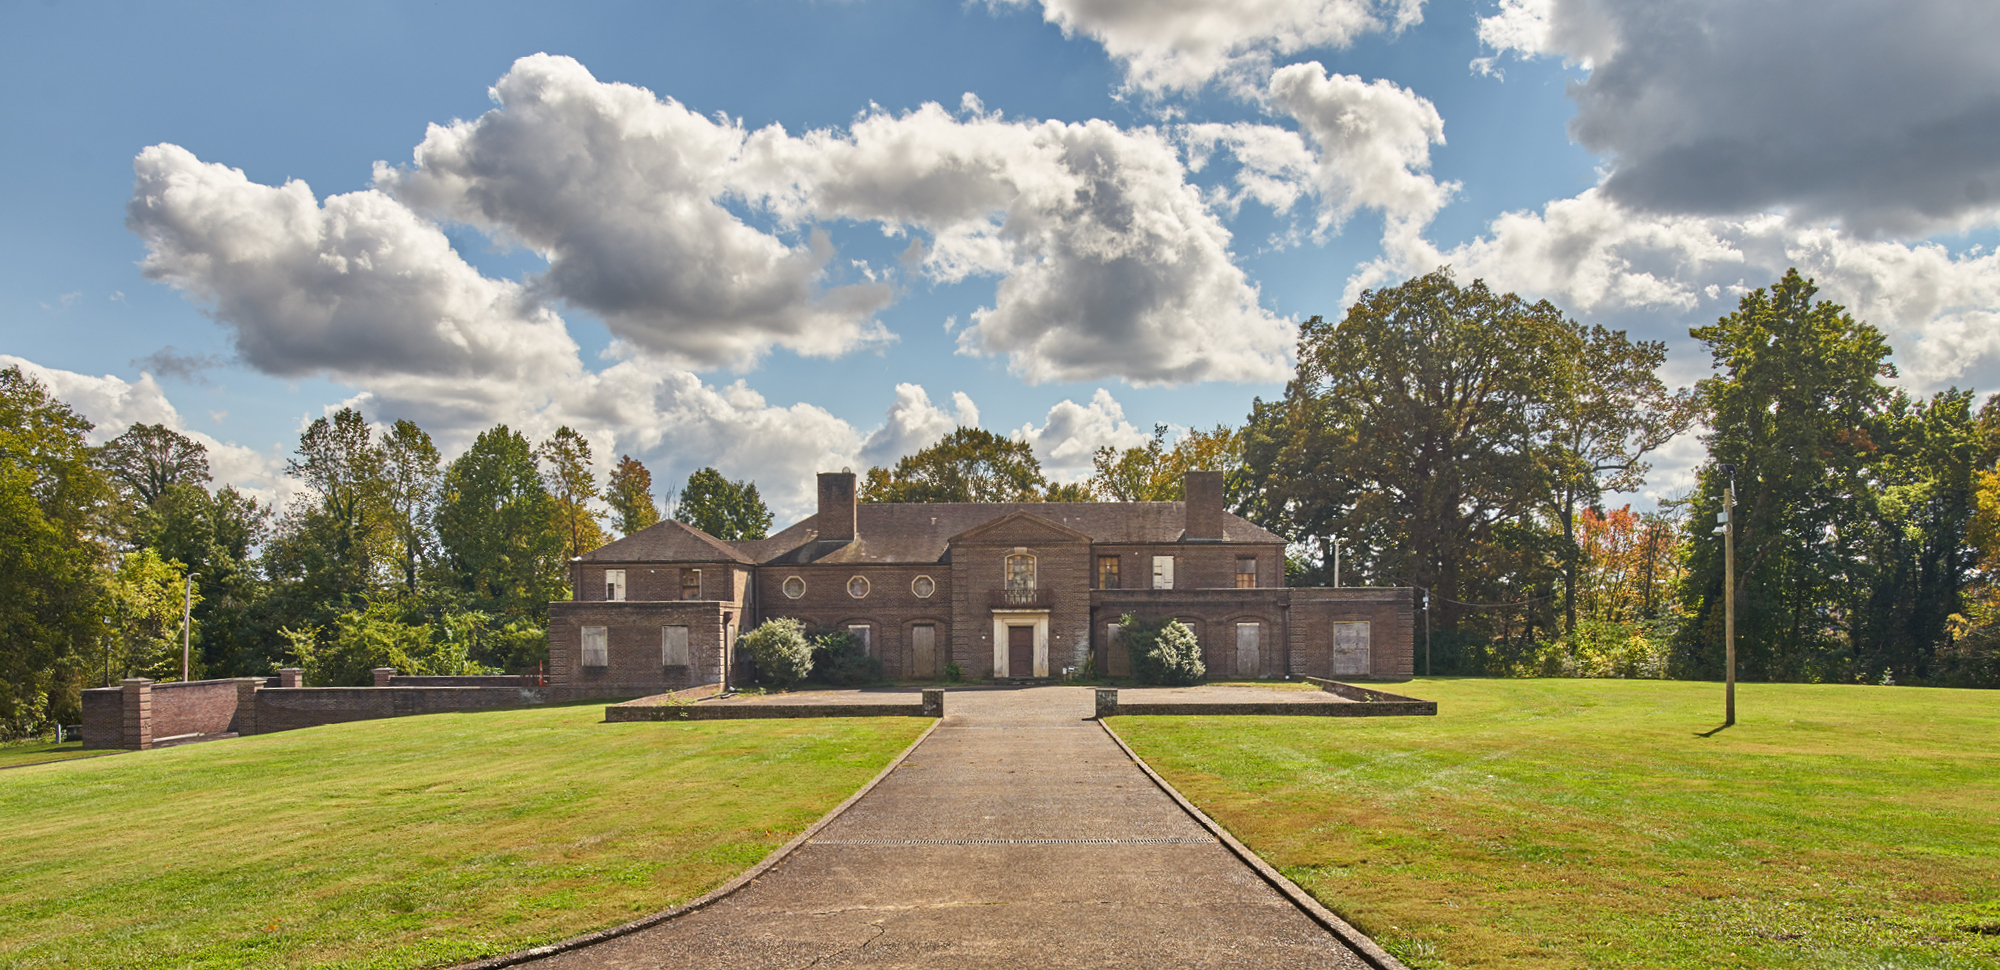 A large, brown brick house sits at the bottom of a grassy hill, with a blue sky full of cumulus clouds above.